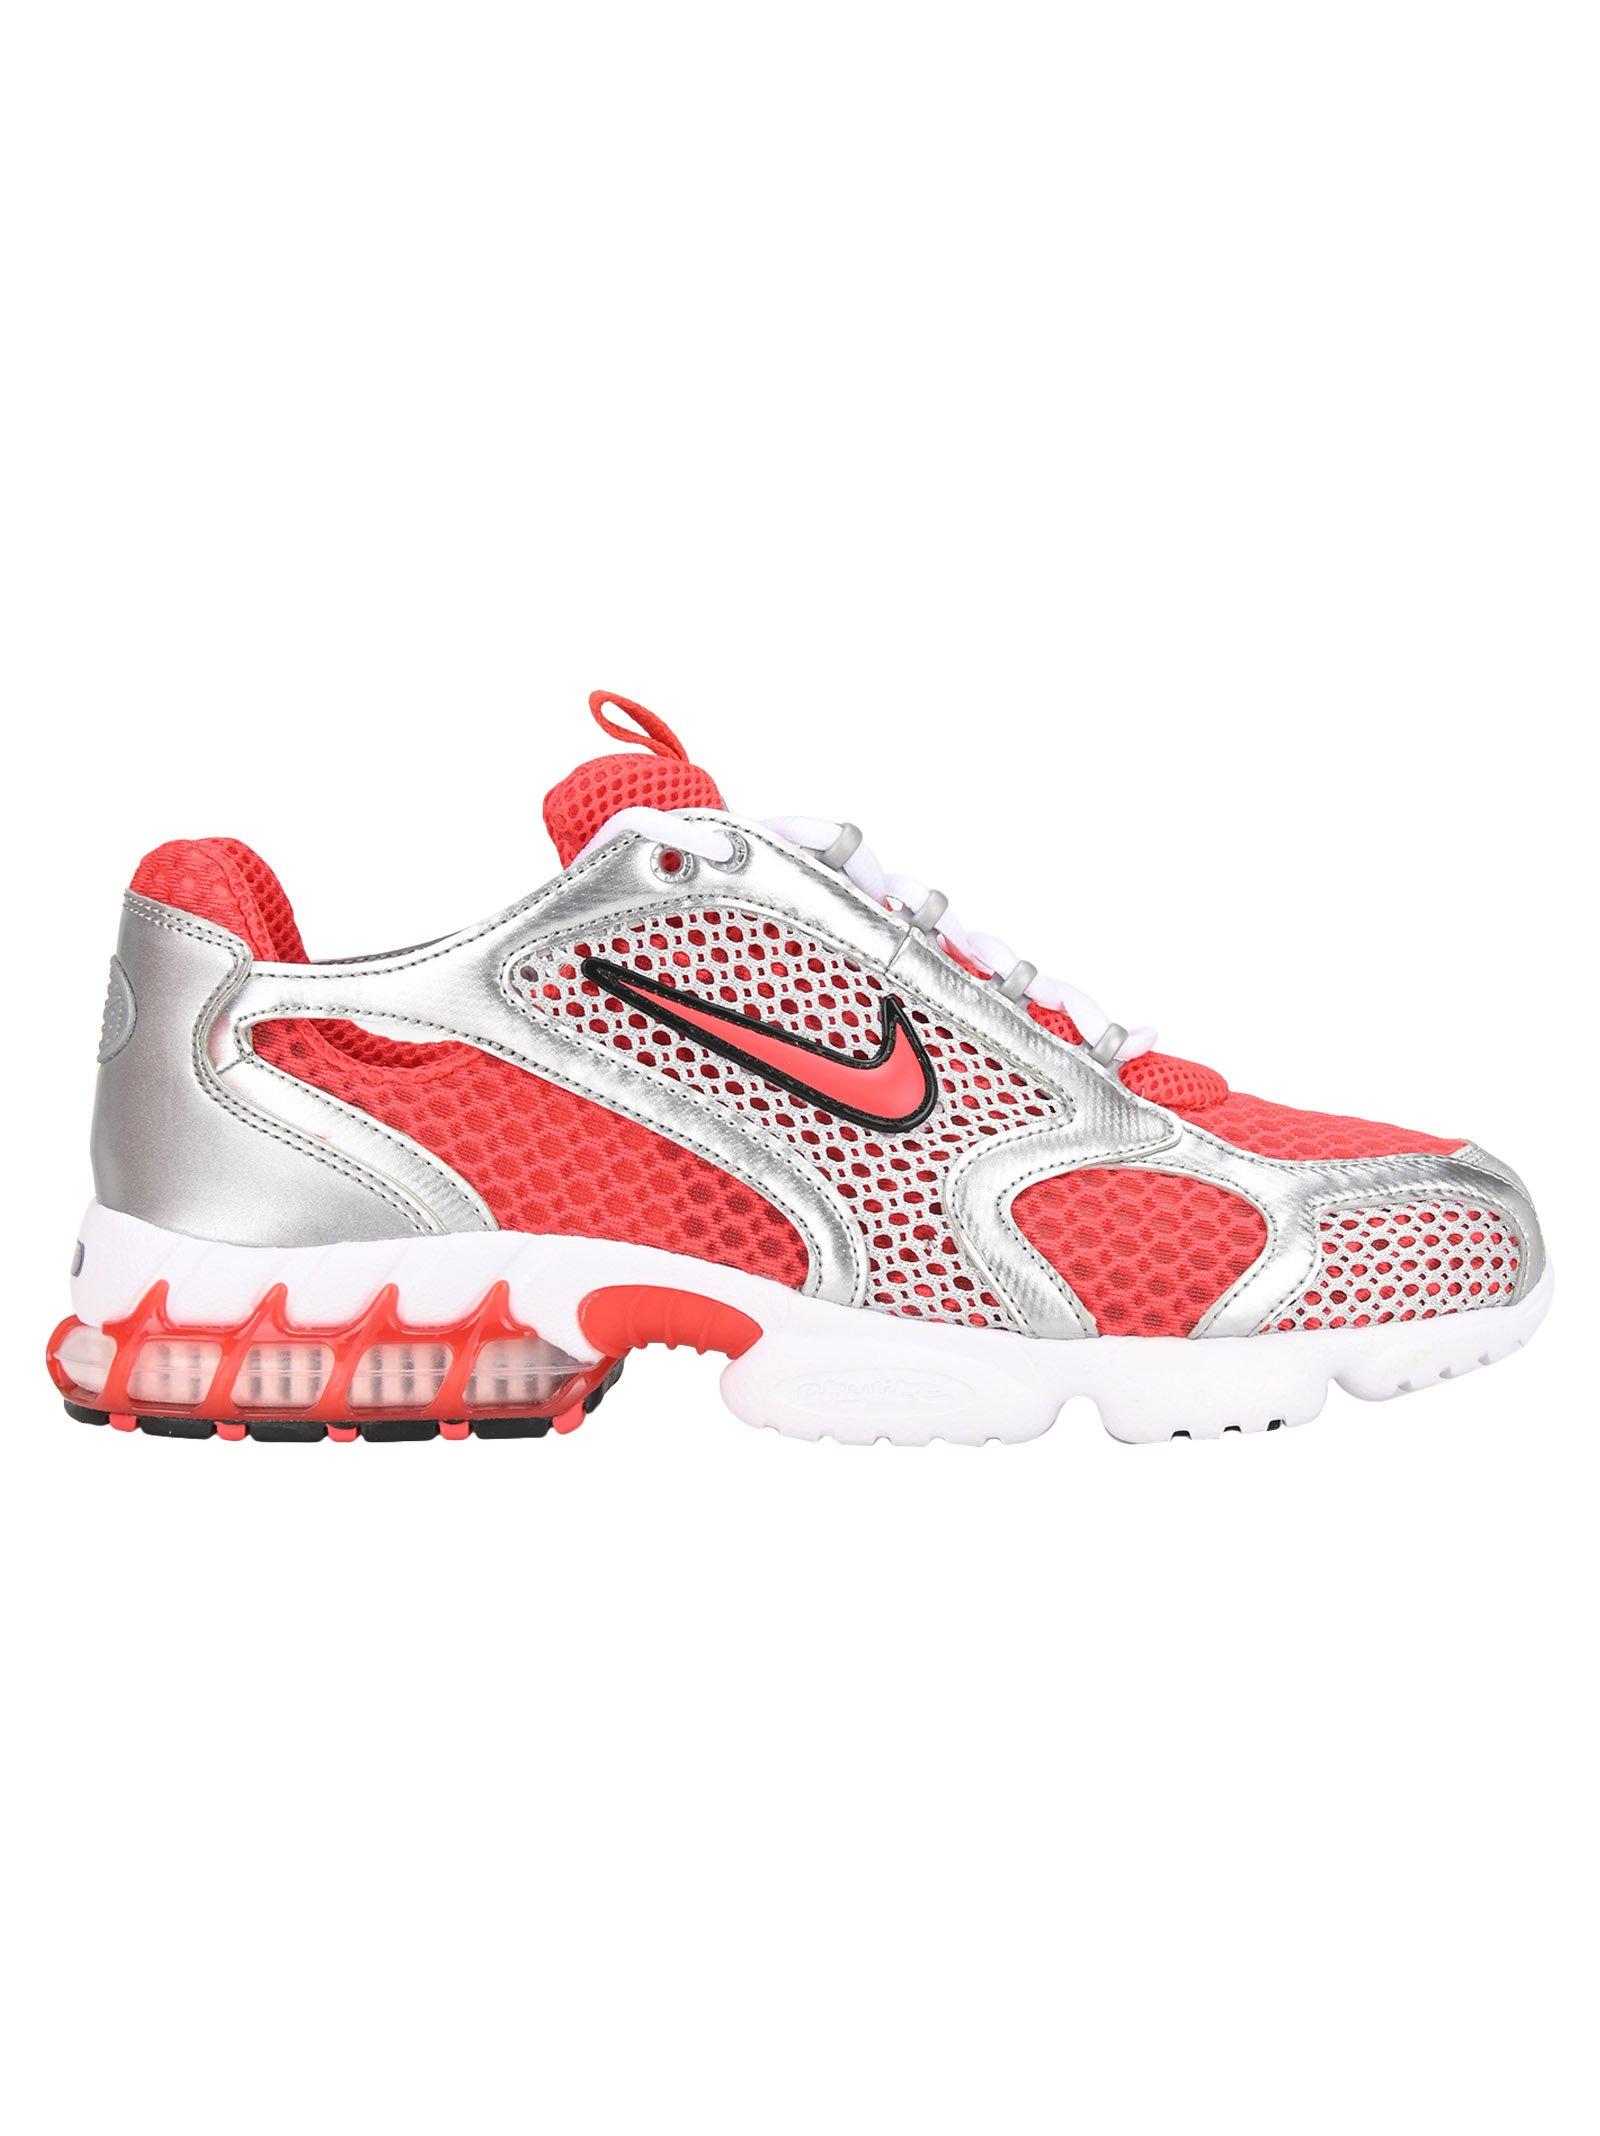 Nike Air Zoom Spiridon Cage 2 'track Red' Shoes for Men - Save 82% | Lyst